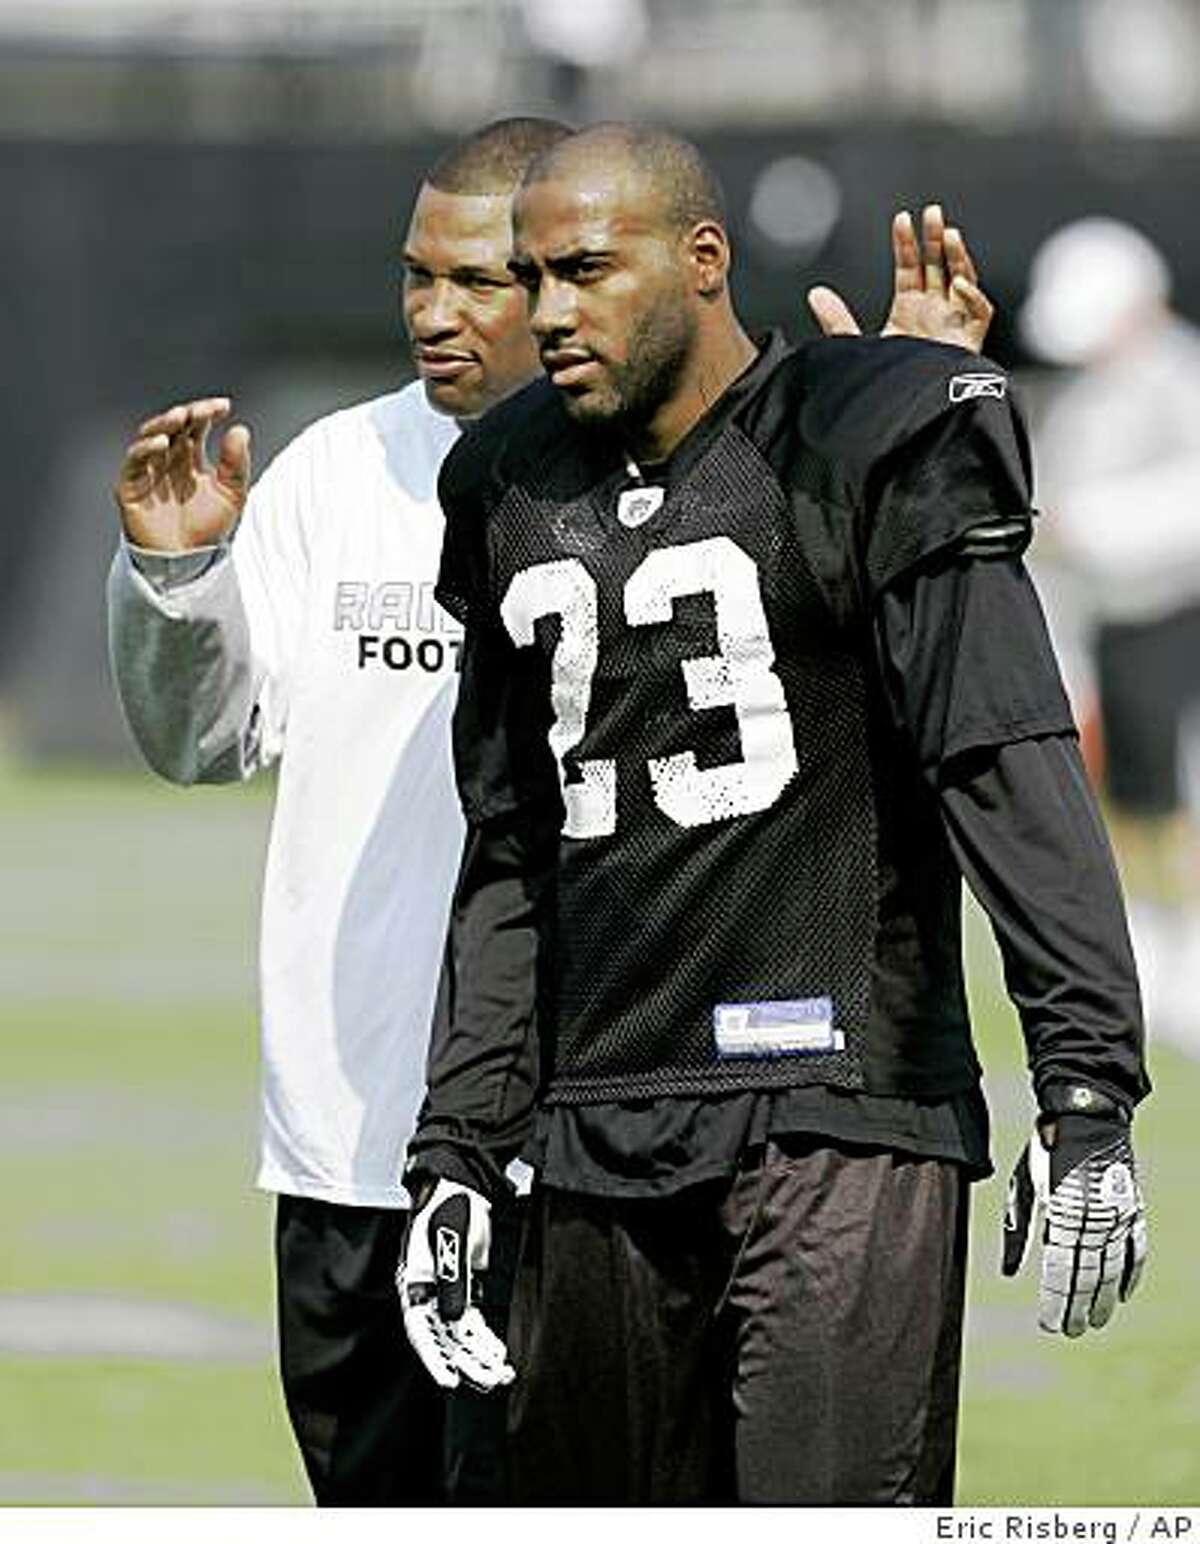 Oakland Raiders cornerback DeAngelo Hall, right, gets instruction from defensive backs coach Darren Perry during workouts at their football training camp in Napa, Calif., Friday, July 25, 2008. Associated Press photo by Eric Risberg